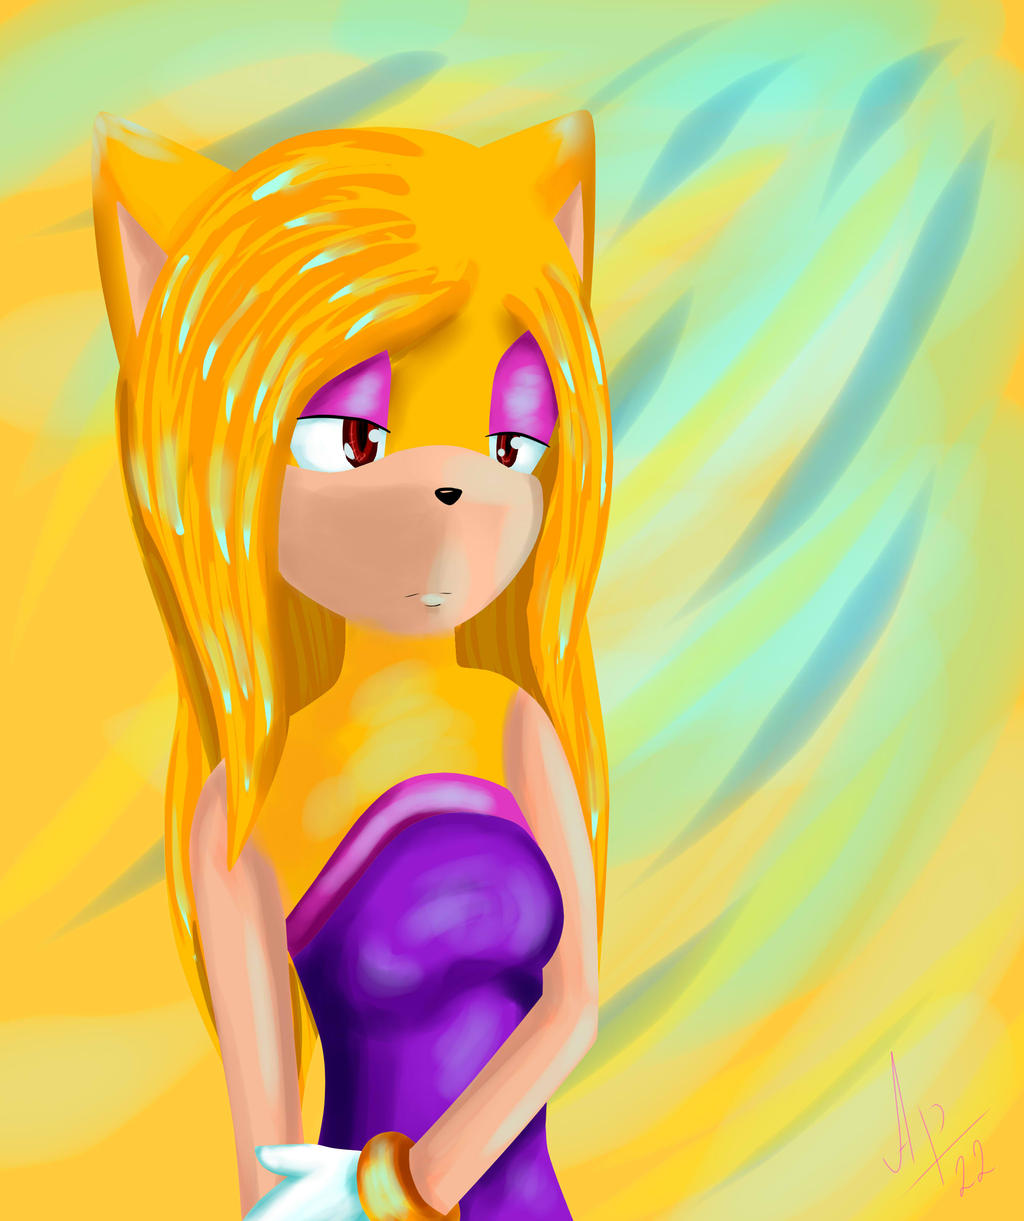 rq_proudly_princess_by_ameliapearce22-d6r7h20.jpg